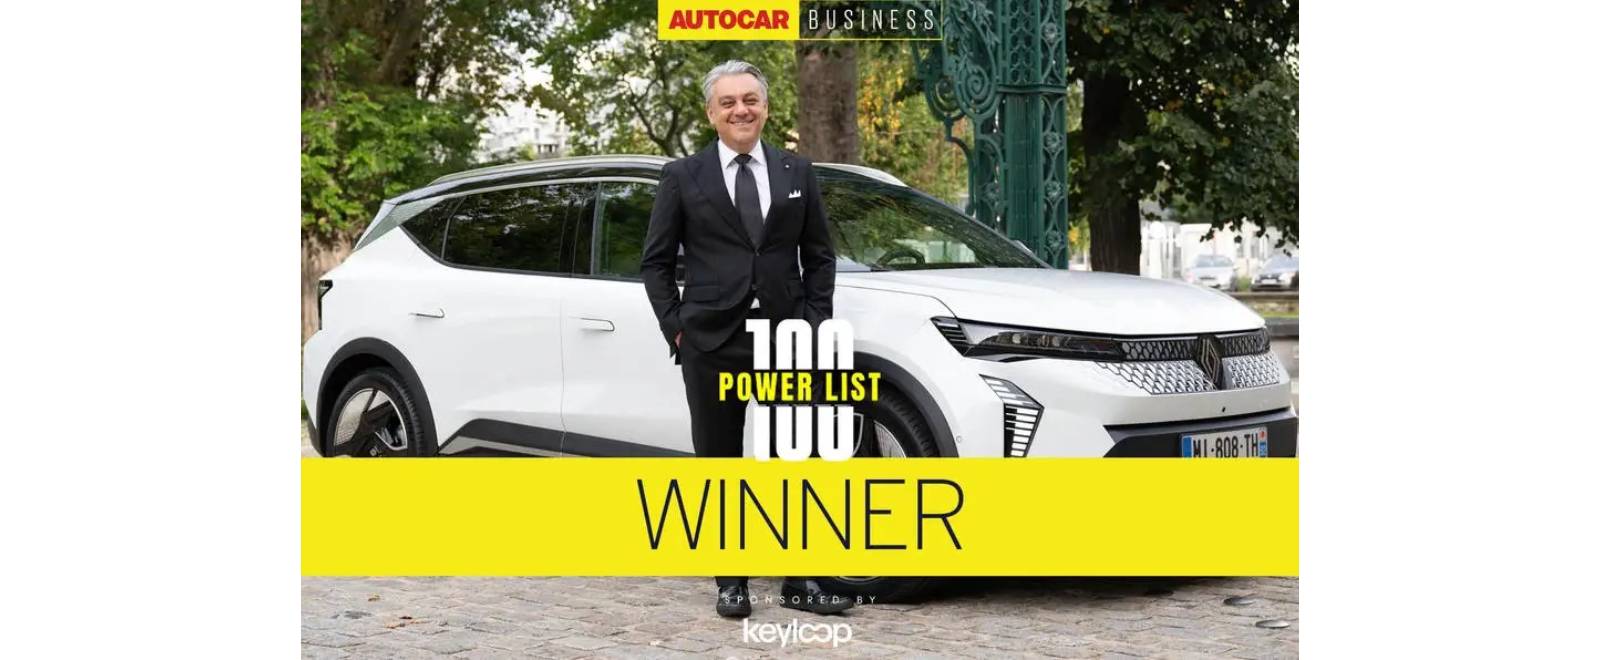 Luca de Meo named the most powerful person in the automotive industry by Autocar business